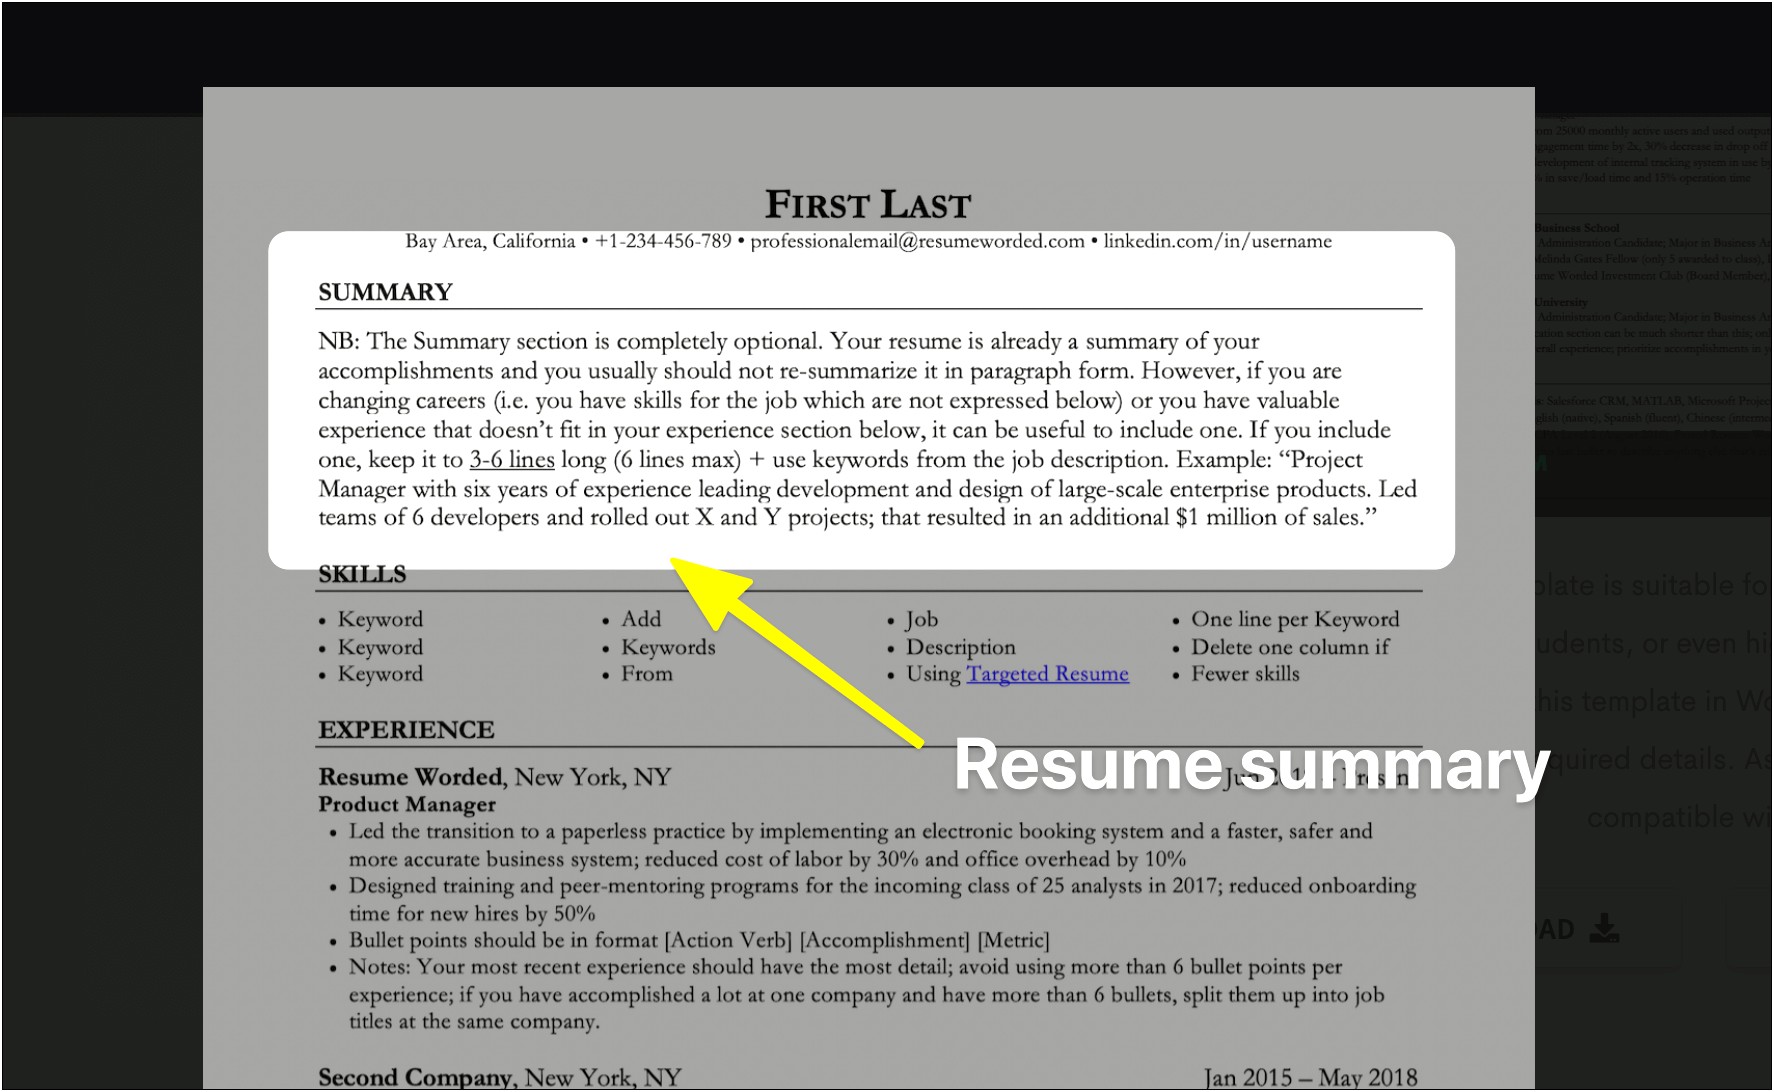 Do You Change Your Resume For Each Job